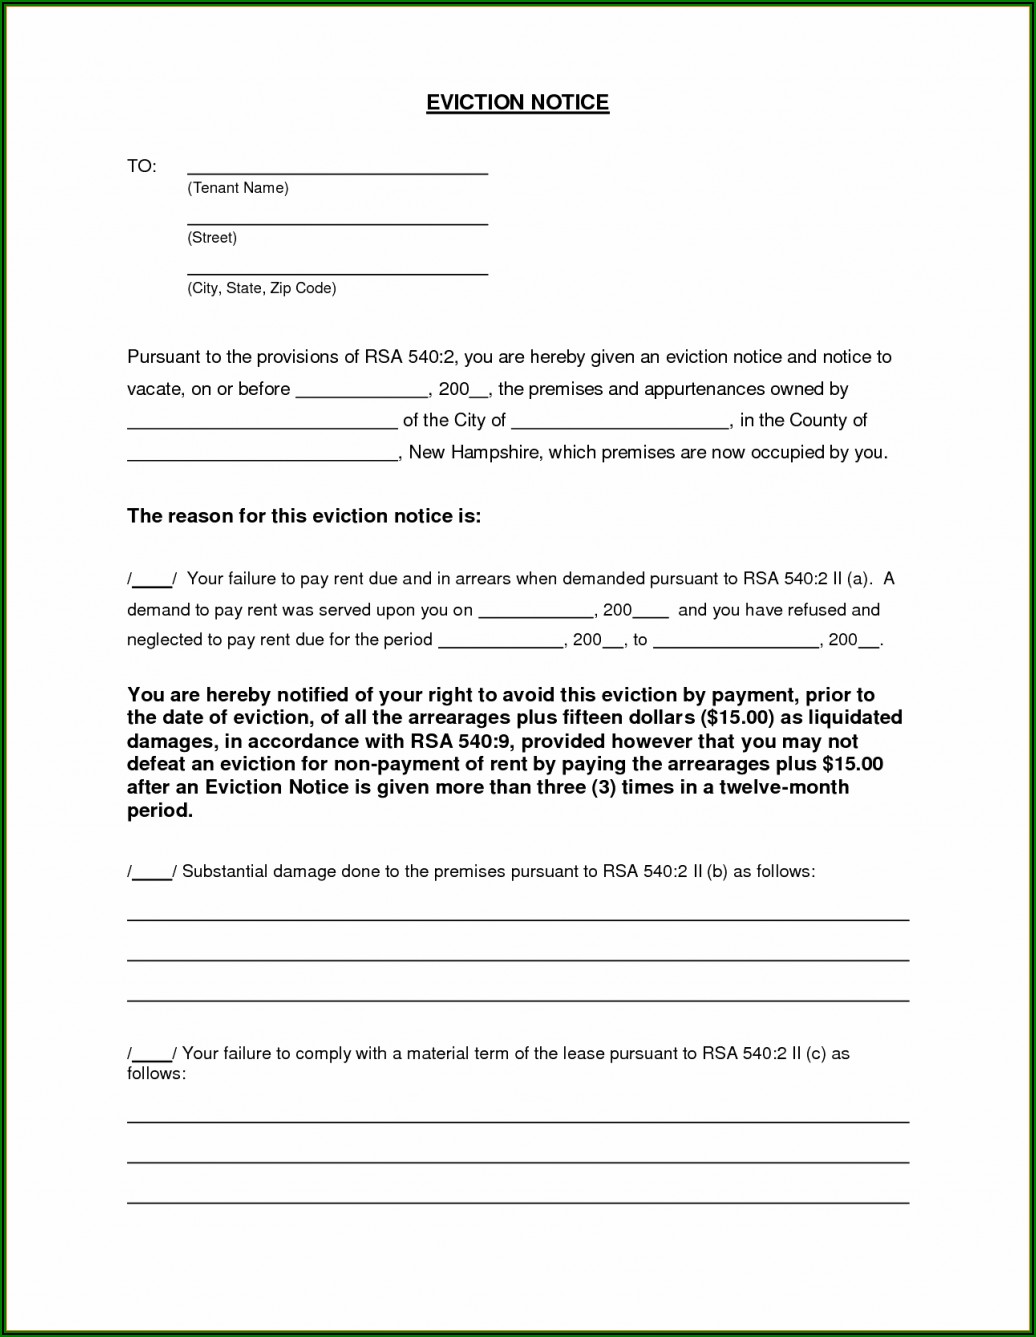 Blank Copy Of An Eviction Notice Form